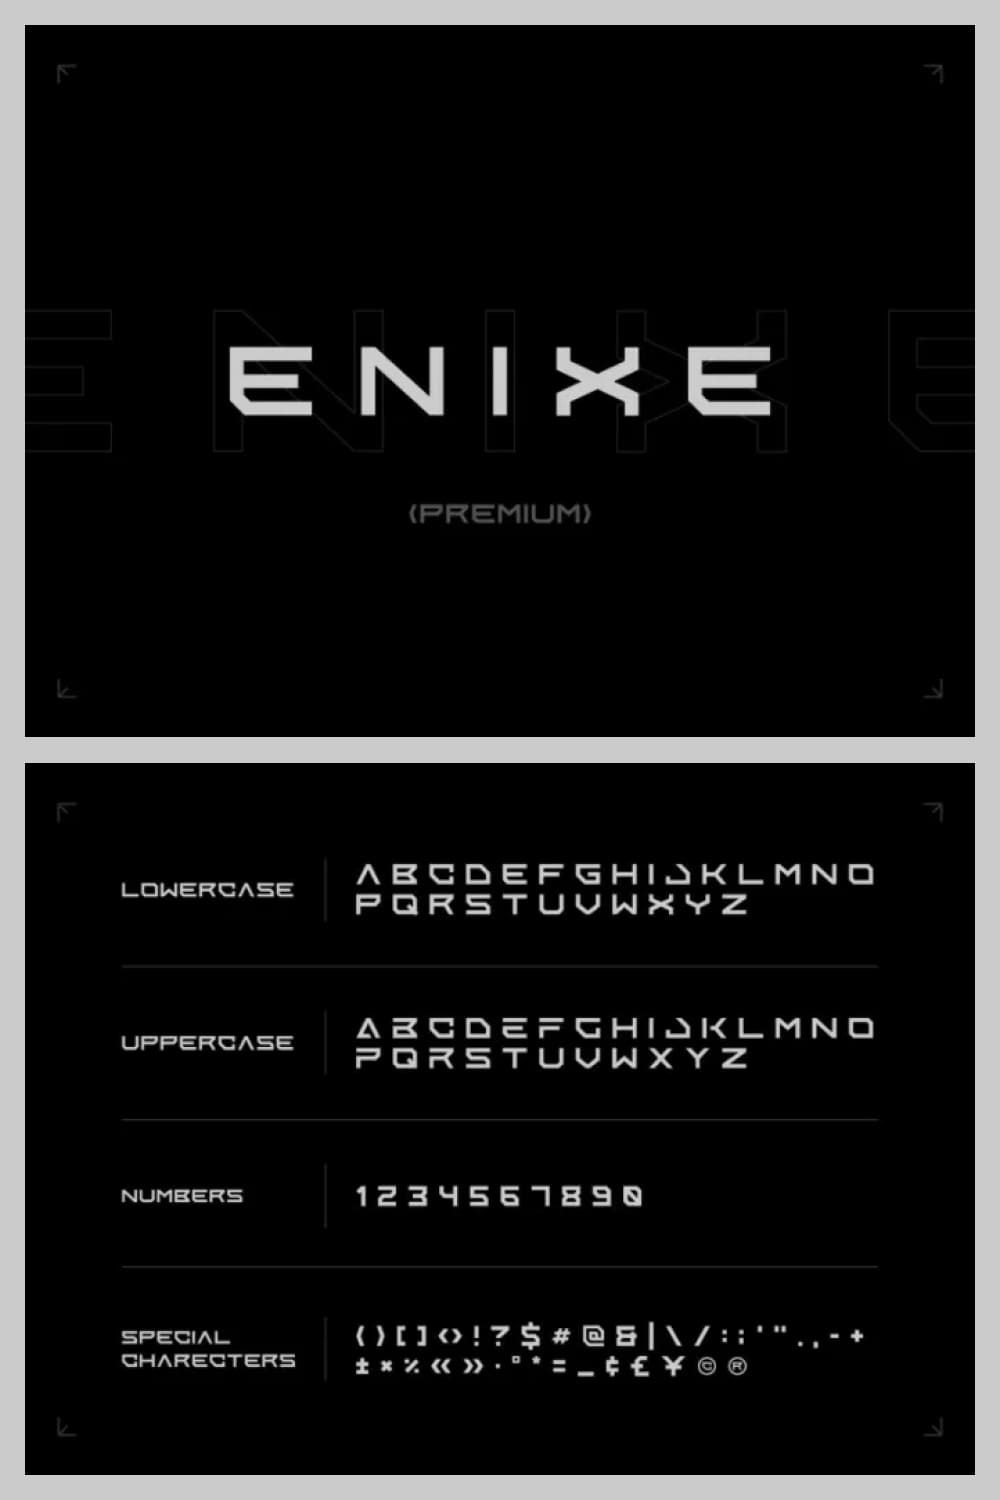 This is a futuristic typeface with high tech look.